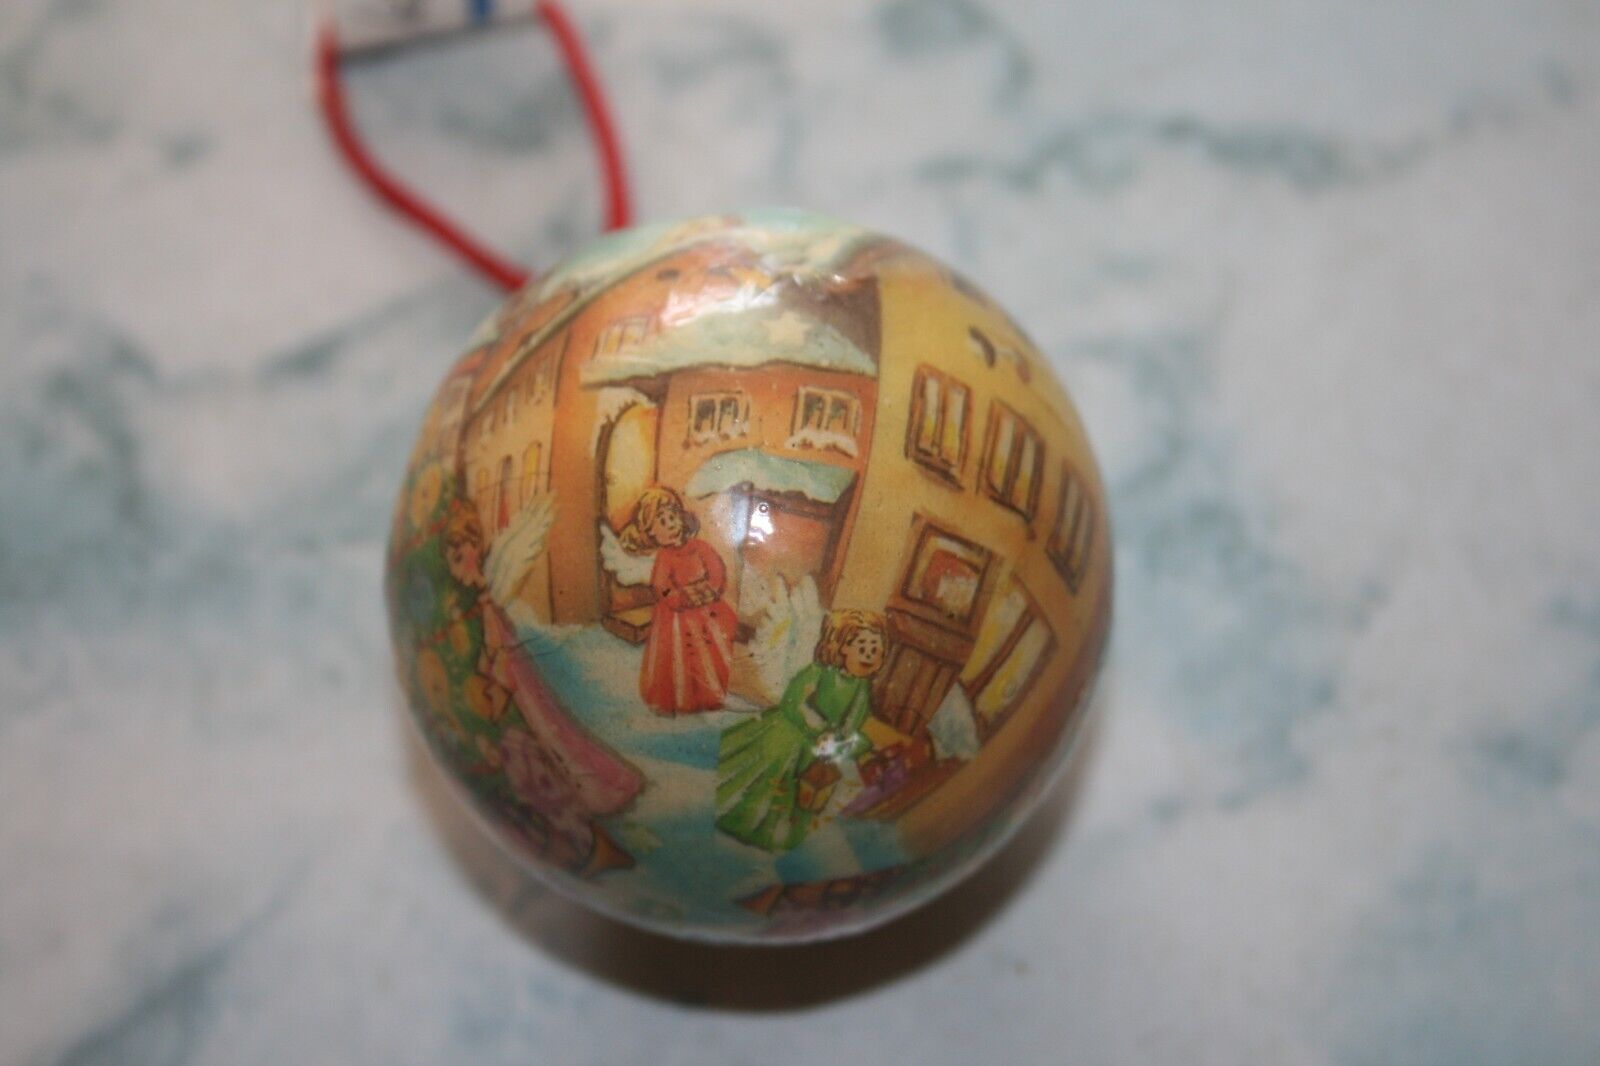 Christmas Plastic Ornament from Germany from 1996